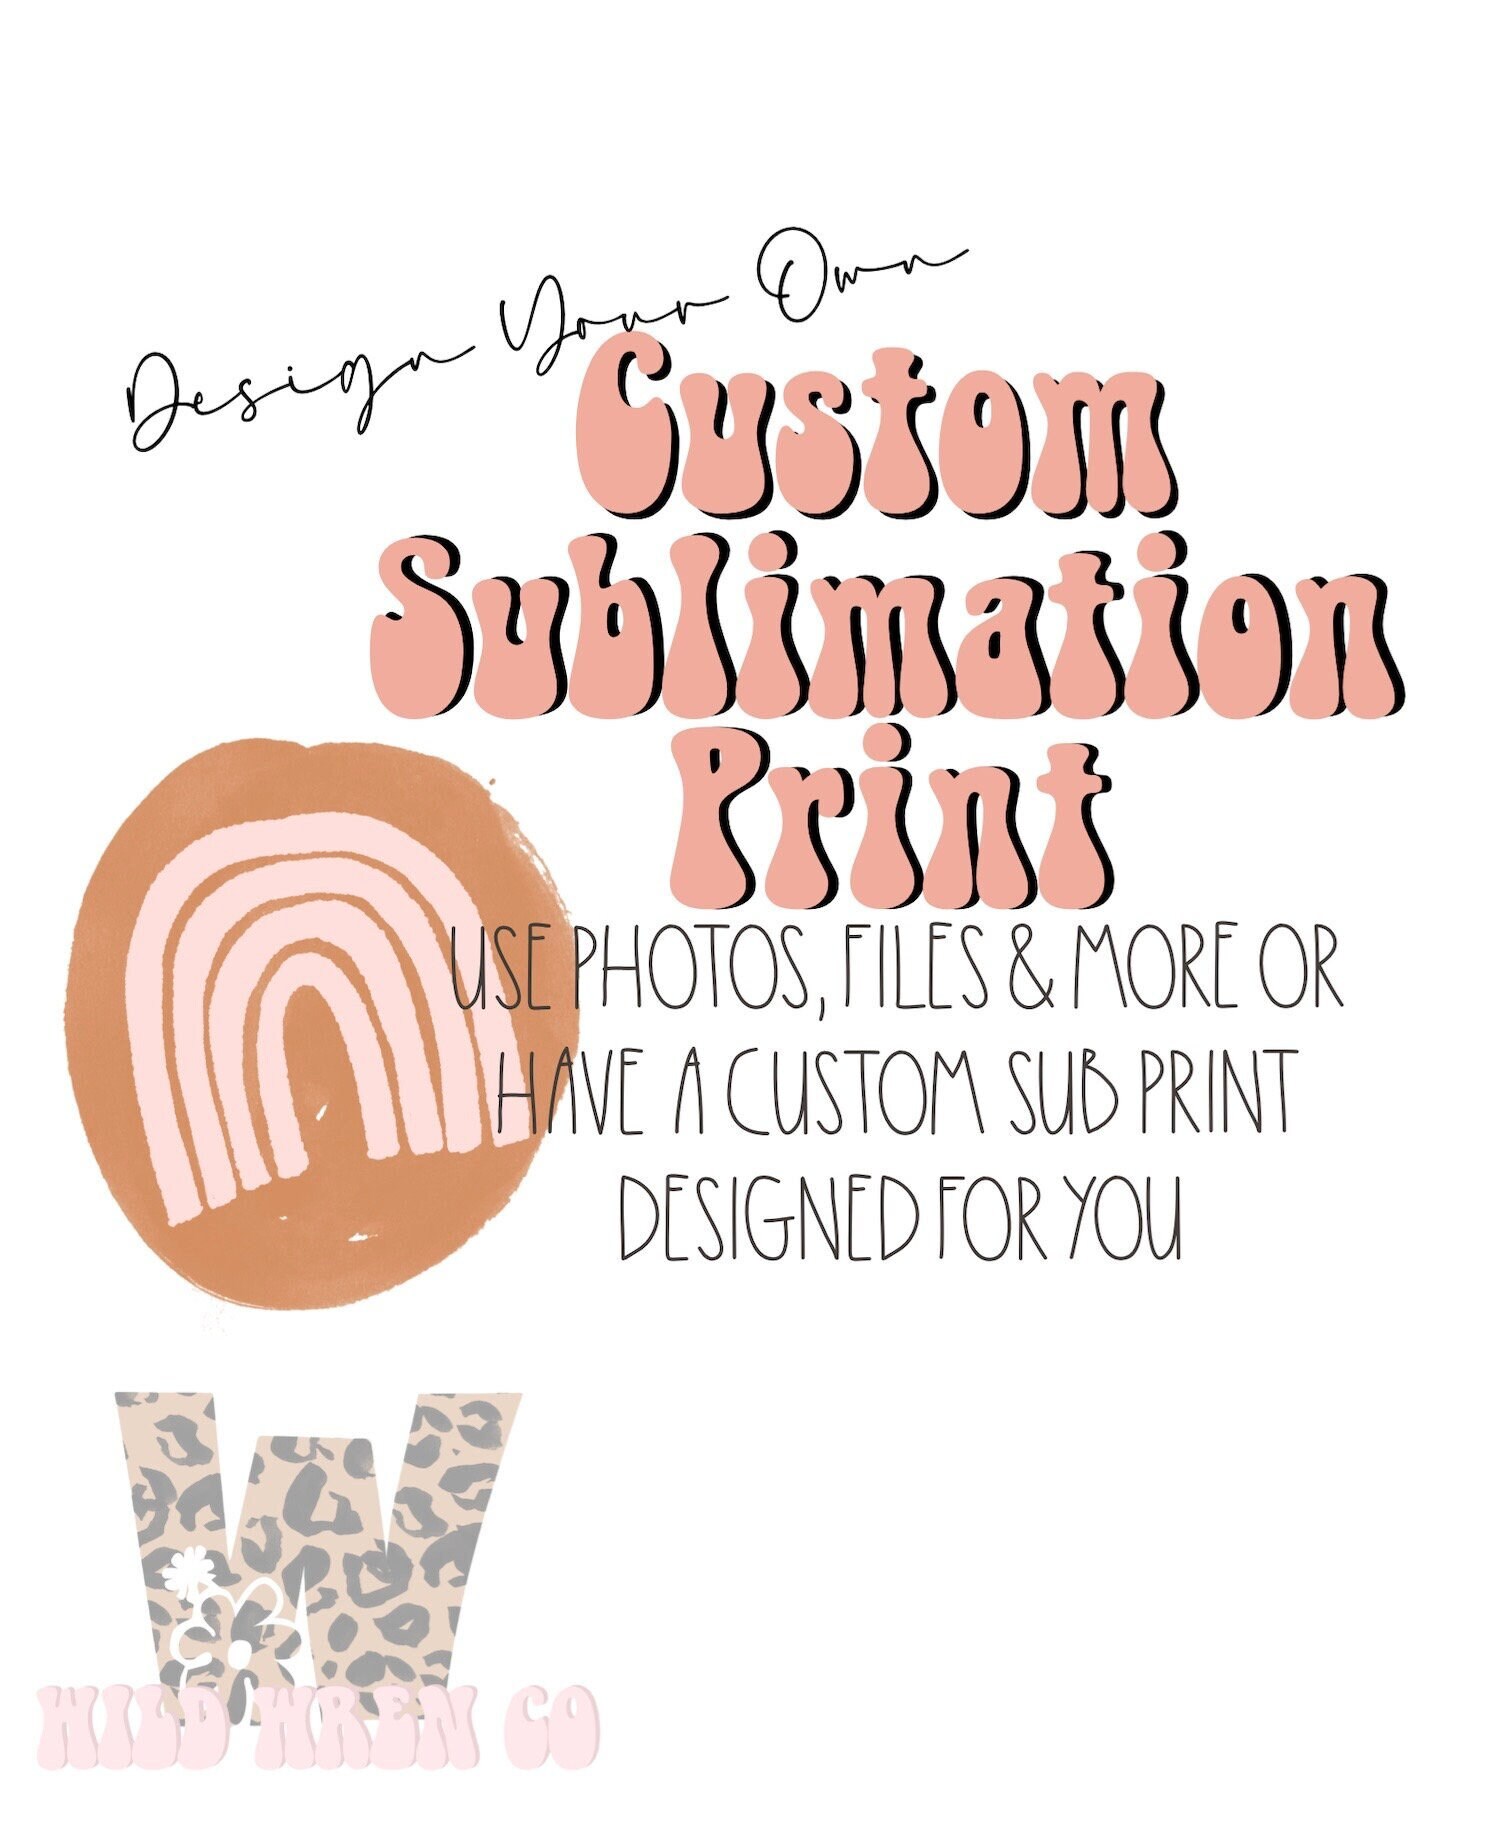 A-SUB Sublimation Paper 8.5x11 125g + A-SUB Printable Vinyl Sticker Paper  GLOSSY